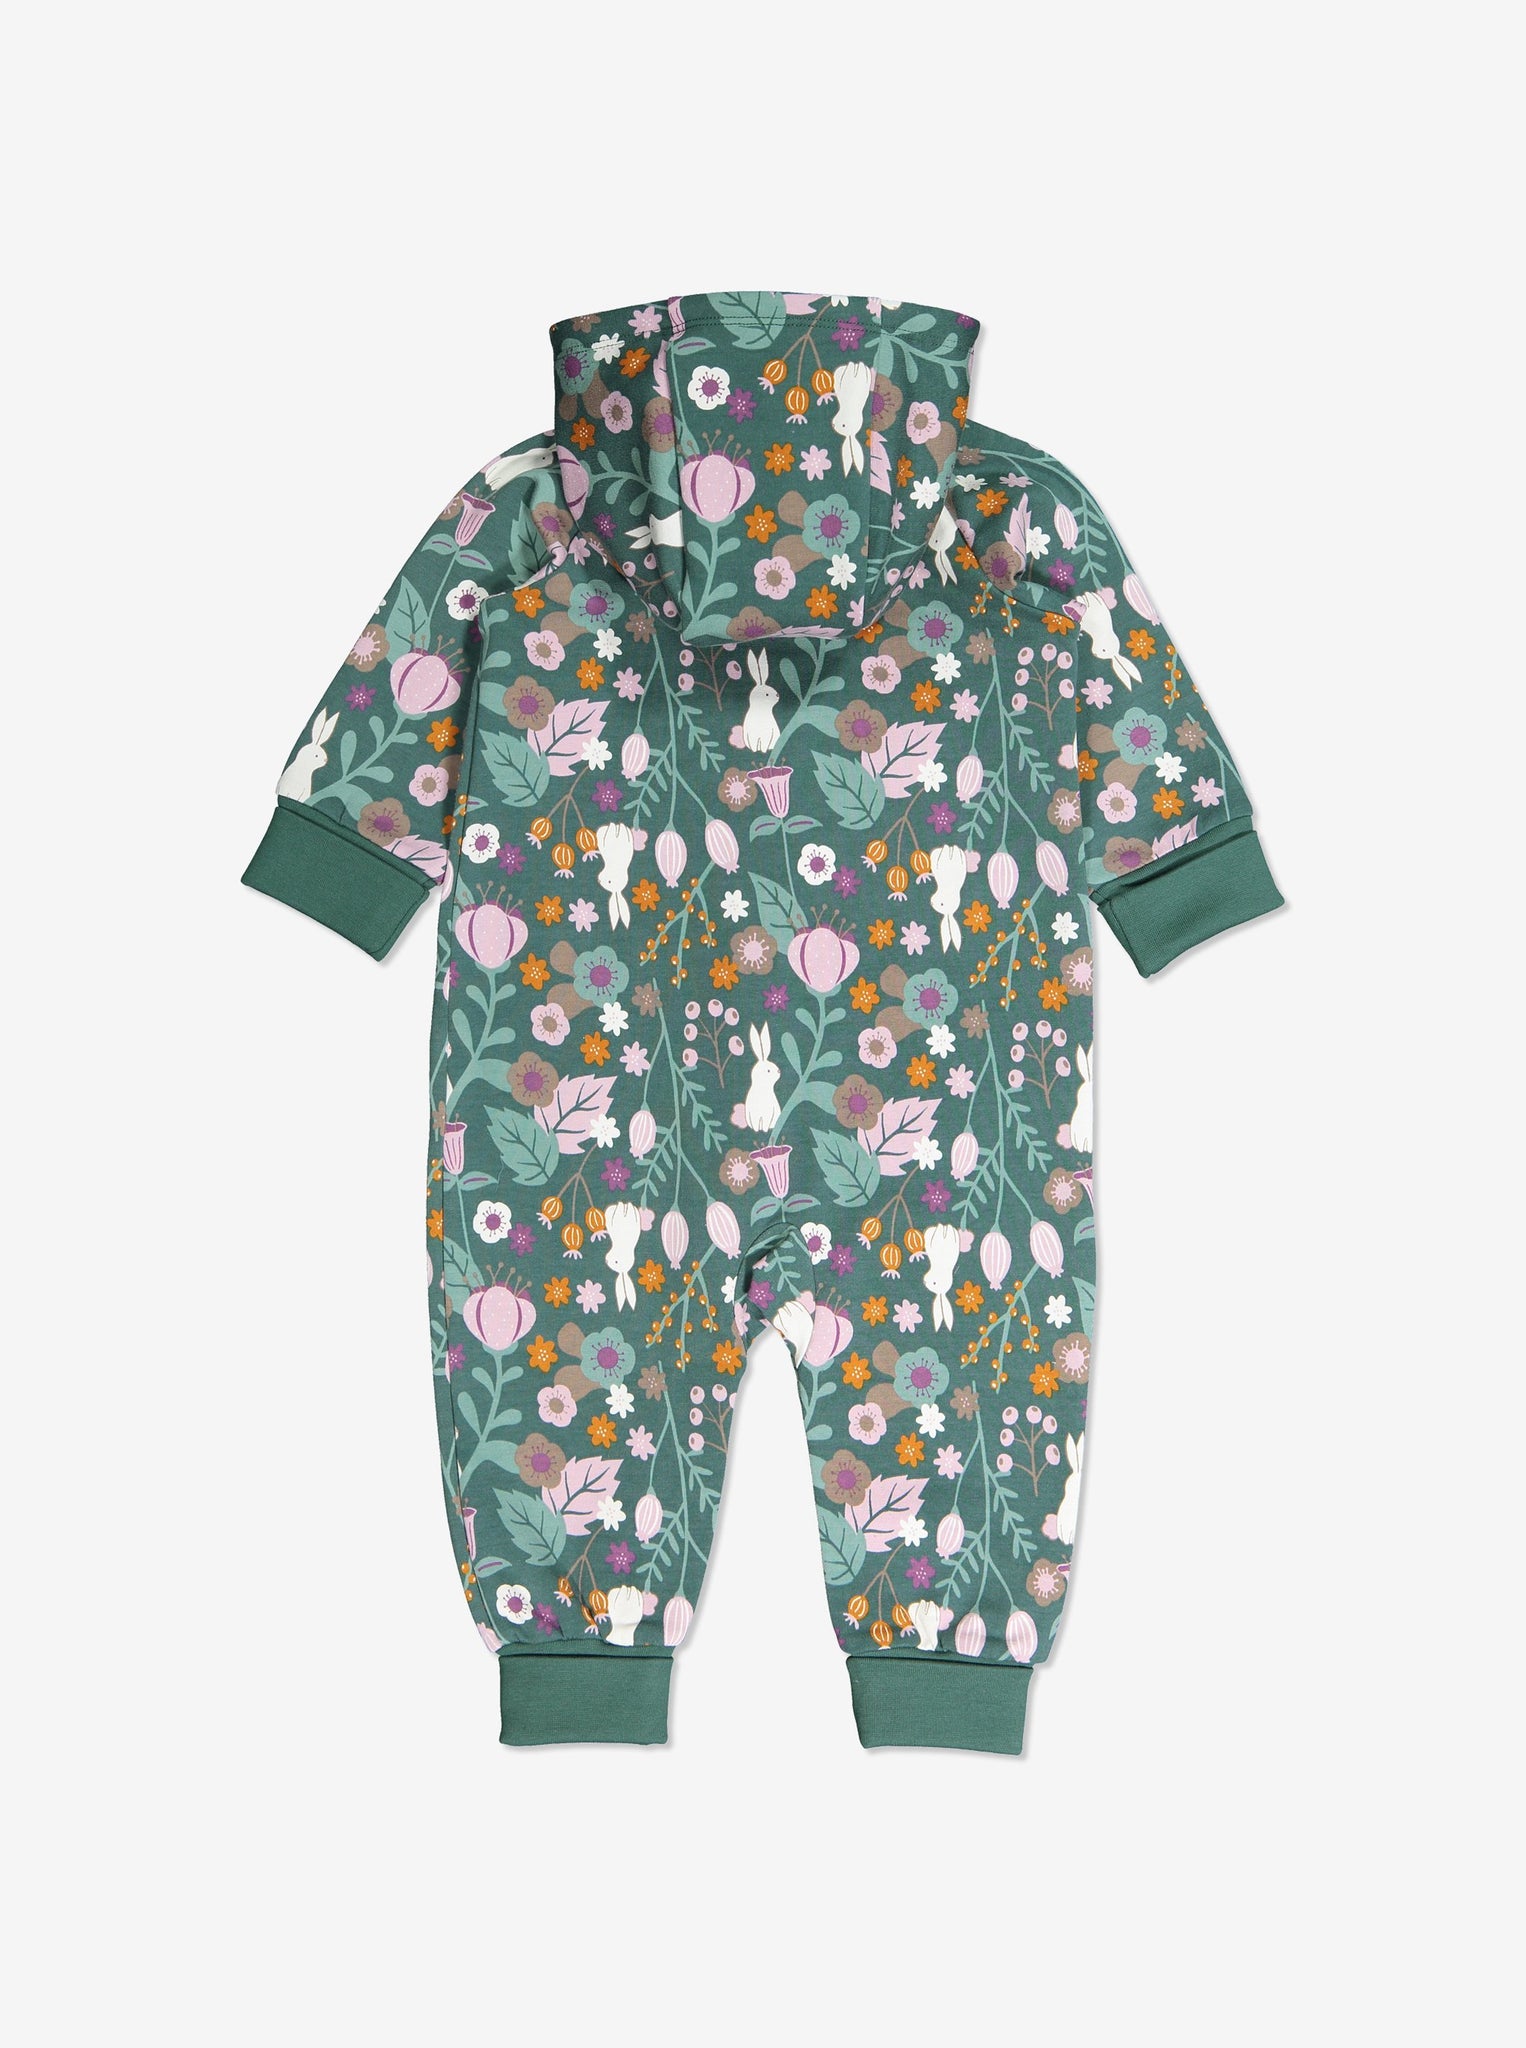 Back view of newborn baby onsie with Woodland print of flowers and bunnies in GOTS organic cotton. With cosy lined hood and full-length zip for speedy dressing and foldable ribbed cuffs for growing room